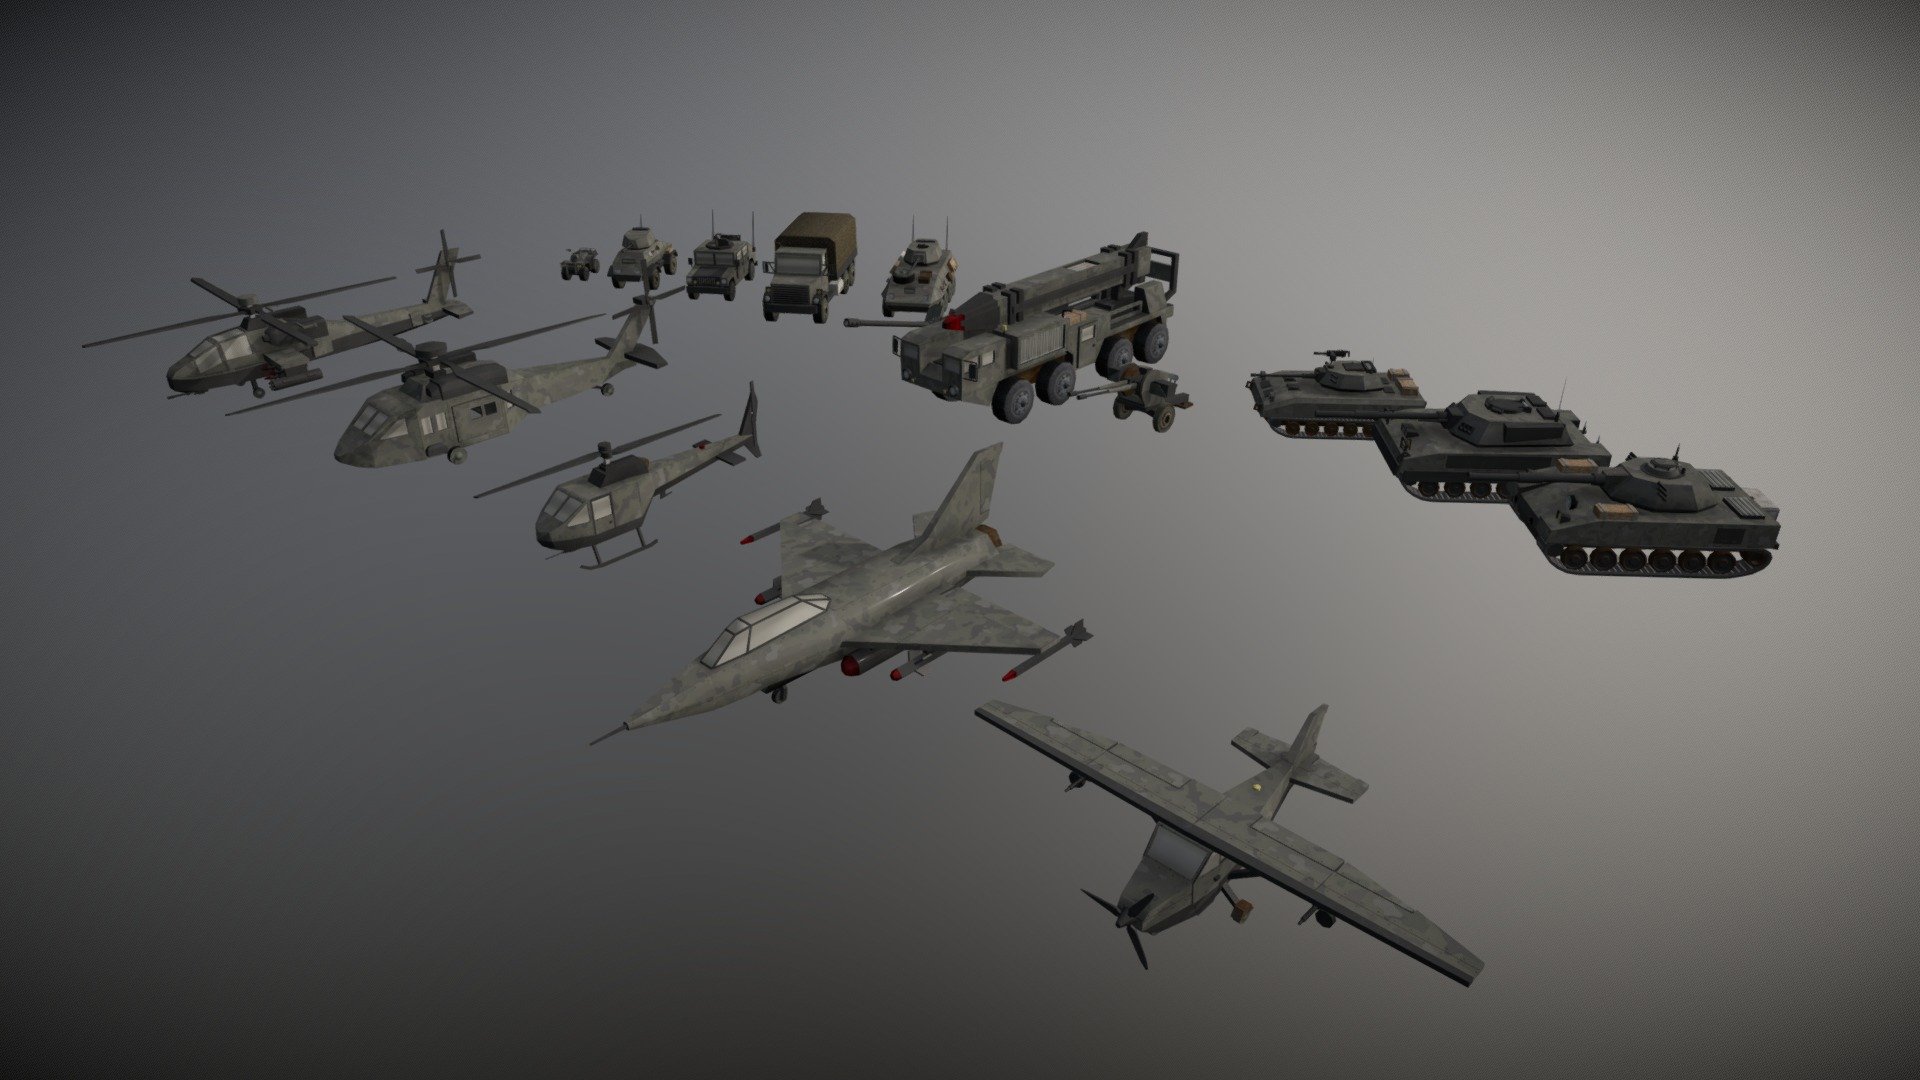 Military Vehicles pack (16 pieces) in low-poly styles game-ready.
All the presented models consist of 41k triangles (1 model from 1.2k to 5k) +1 Albedo atlas 512x512 with a texel density of 0.3 pixels/cm.

4 light-medium ground vehicles;
3 helicopters;
3 tanks;
2 anti-aircraft weapons, 1 launch vehicle;
1 aircraft, 1 jet fighter;
1 ATV 3d model